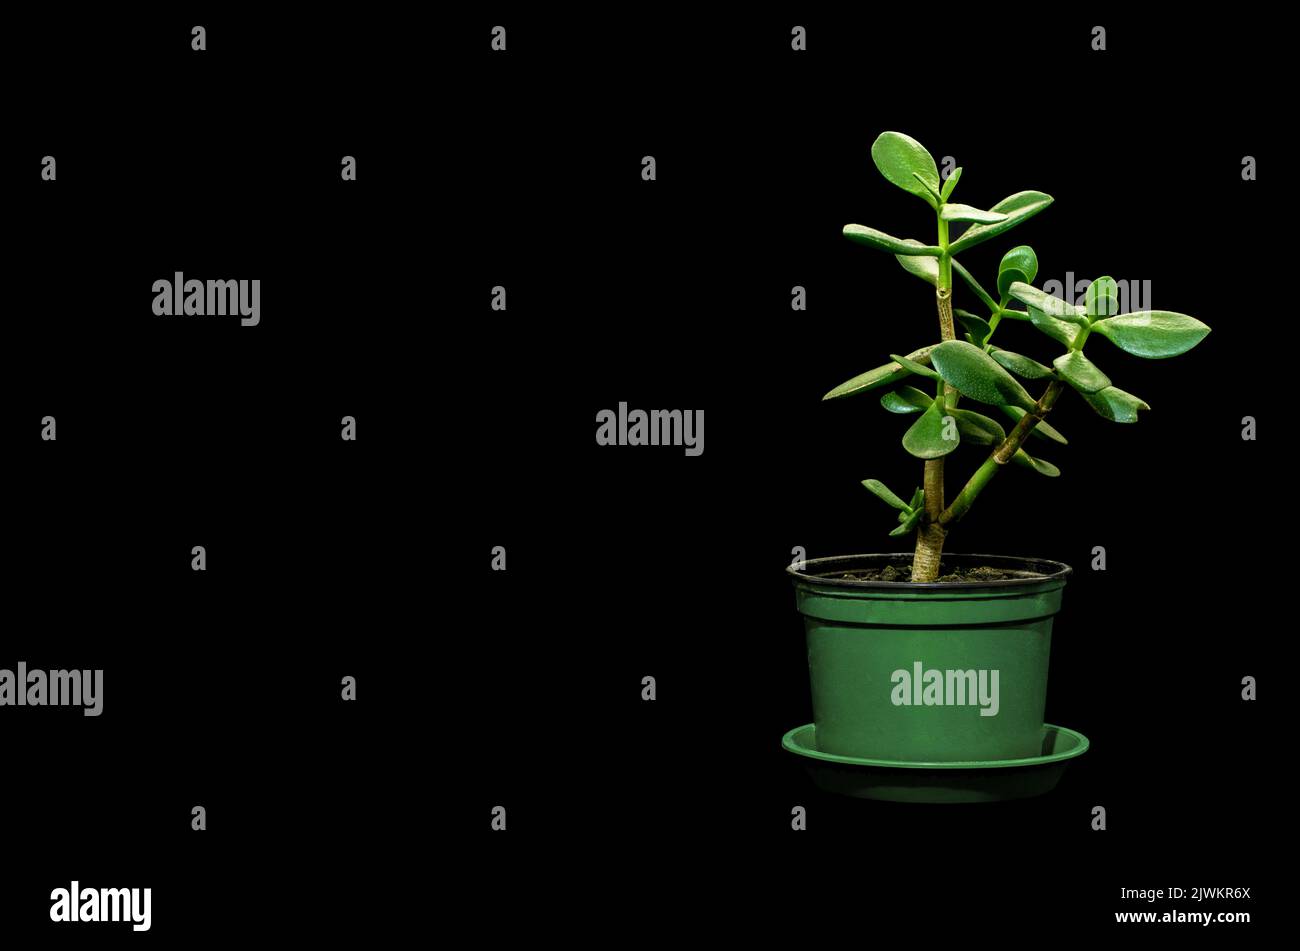 Image of a houseplant Crassula in a pot on a black background Stock Photo